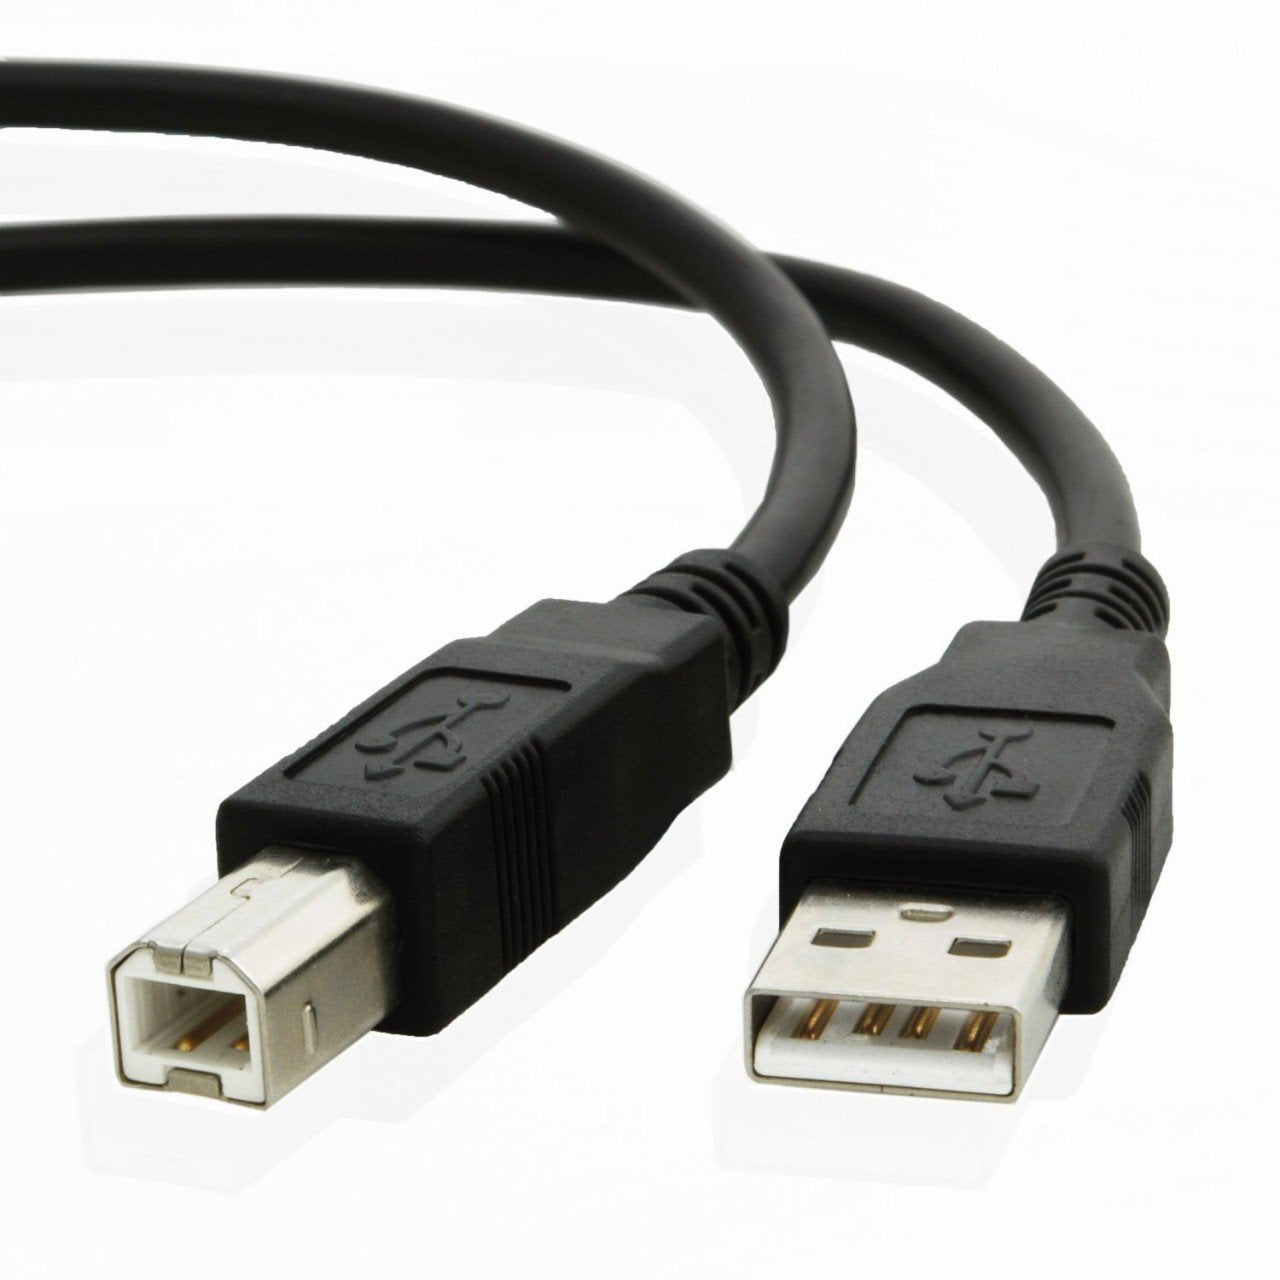 USB cable for Xerox WORKCENTRE 6027